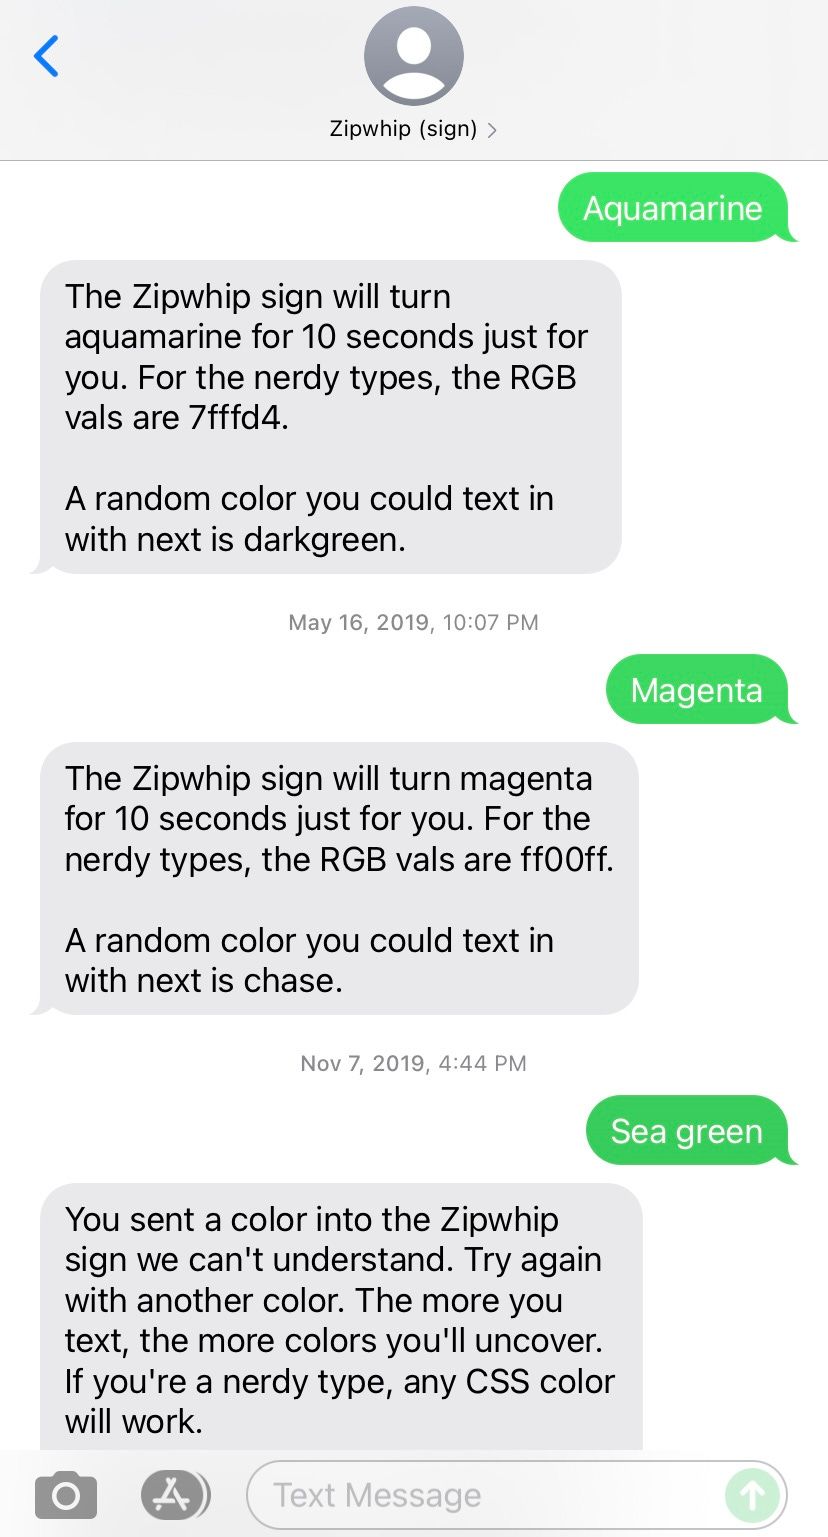 Texting the Zipwhip sign